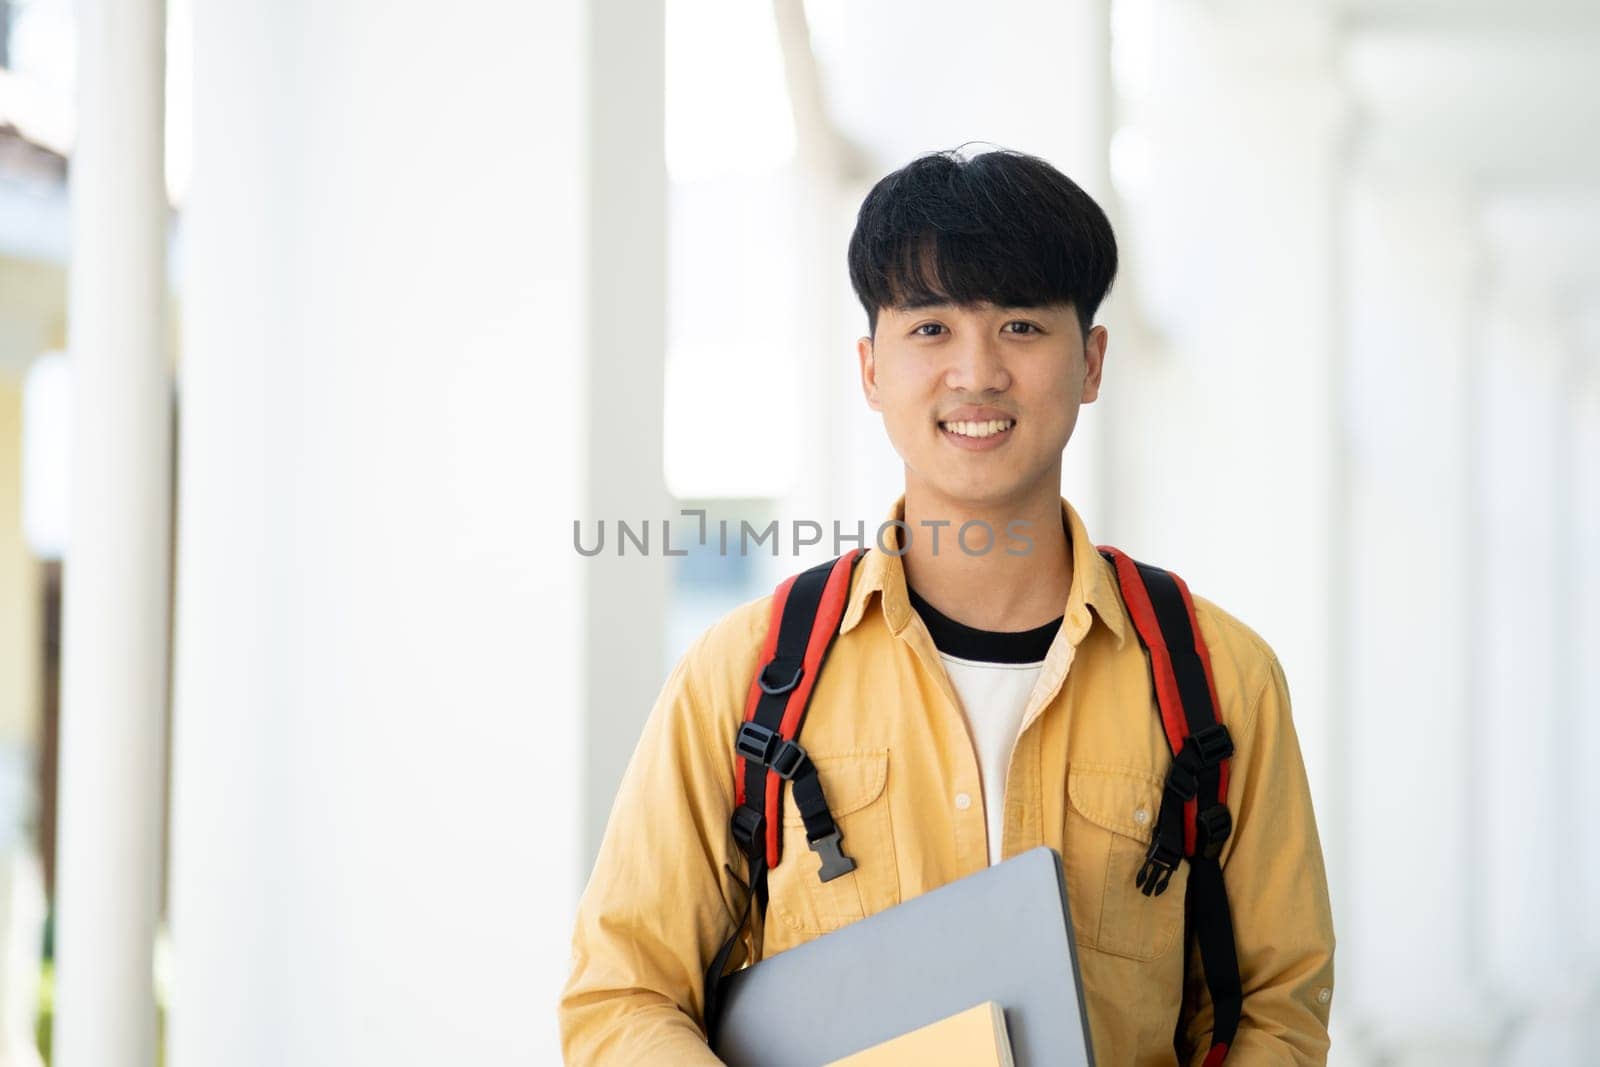 A college student stands in the hallway of his school, holding textbooks and smiling, ready for a day of learning and studies.